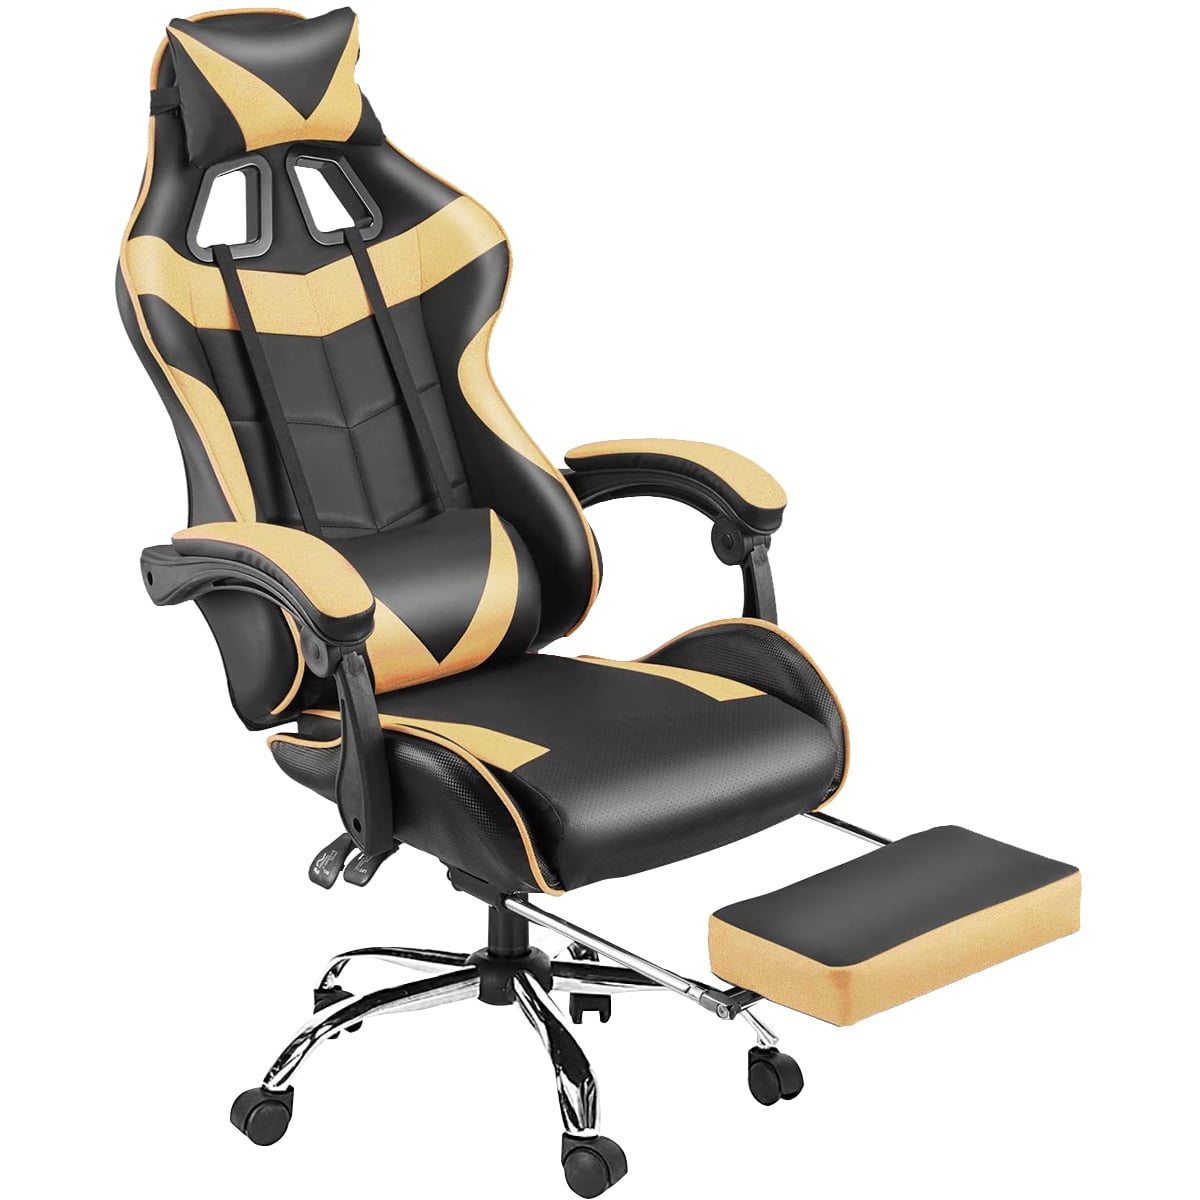 Details about   Ergonomic Office Computer Gaming Chair Racing Chair High Back Footrest Yellow